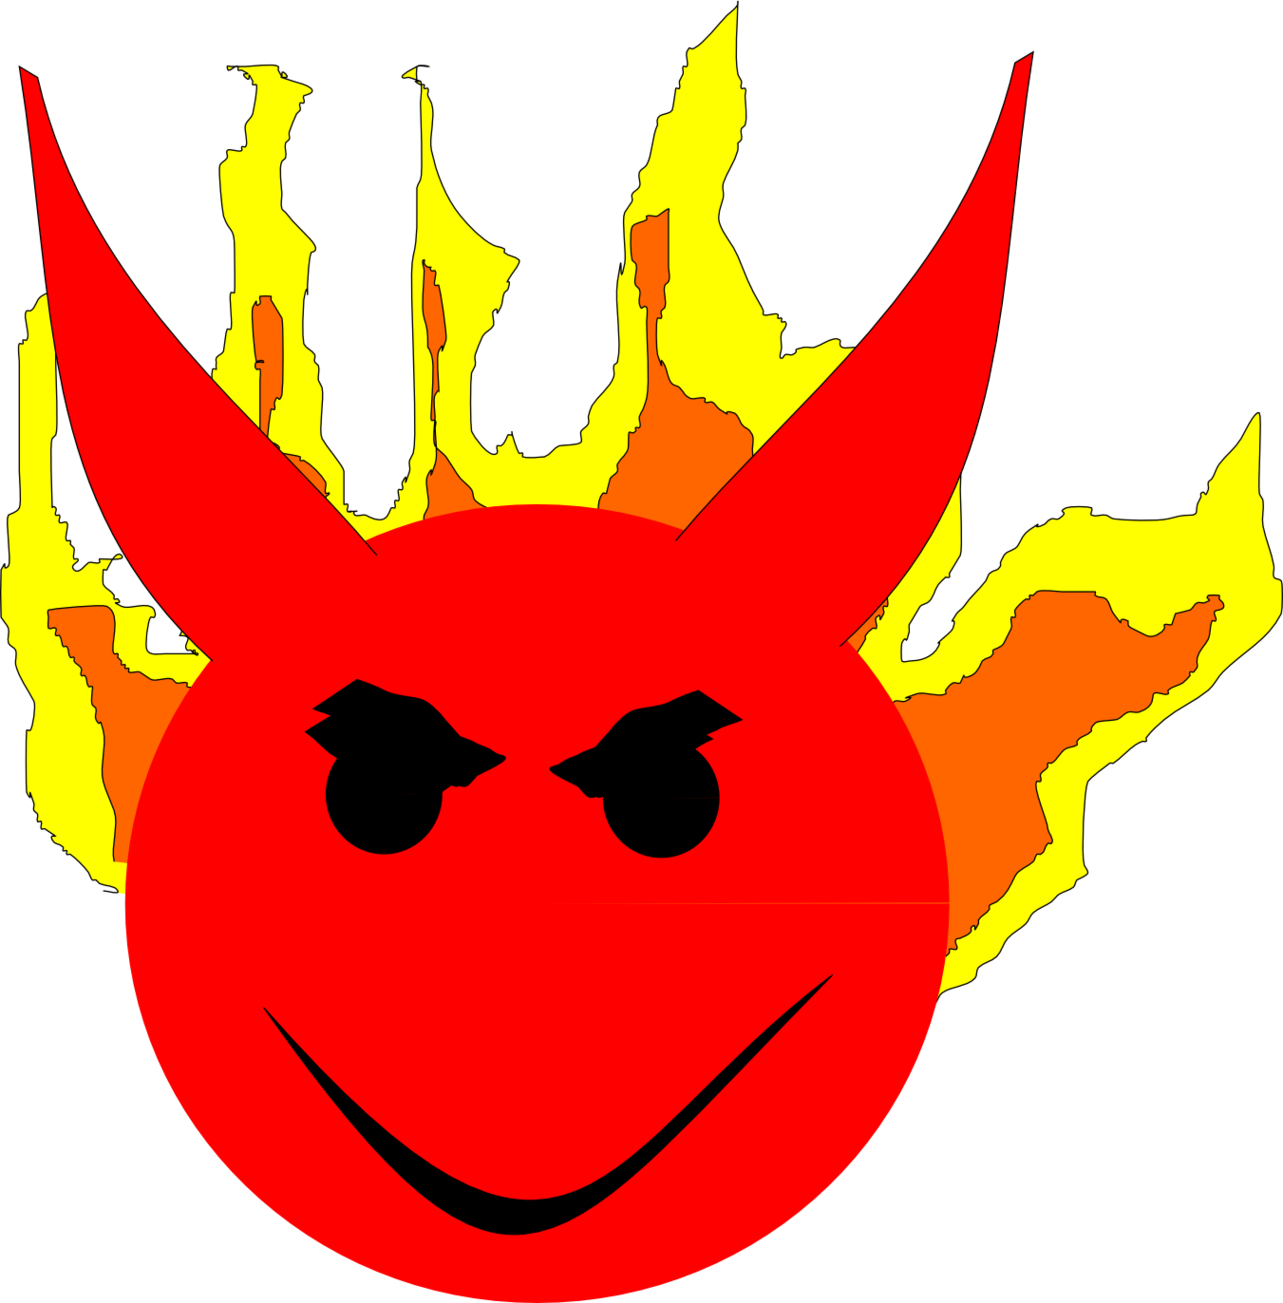 Devil Smiley Faces Clipart - Free to use Clip Art Resource